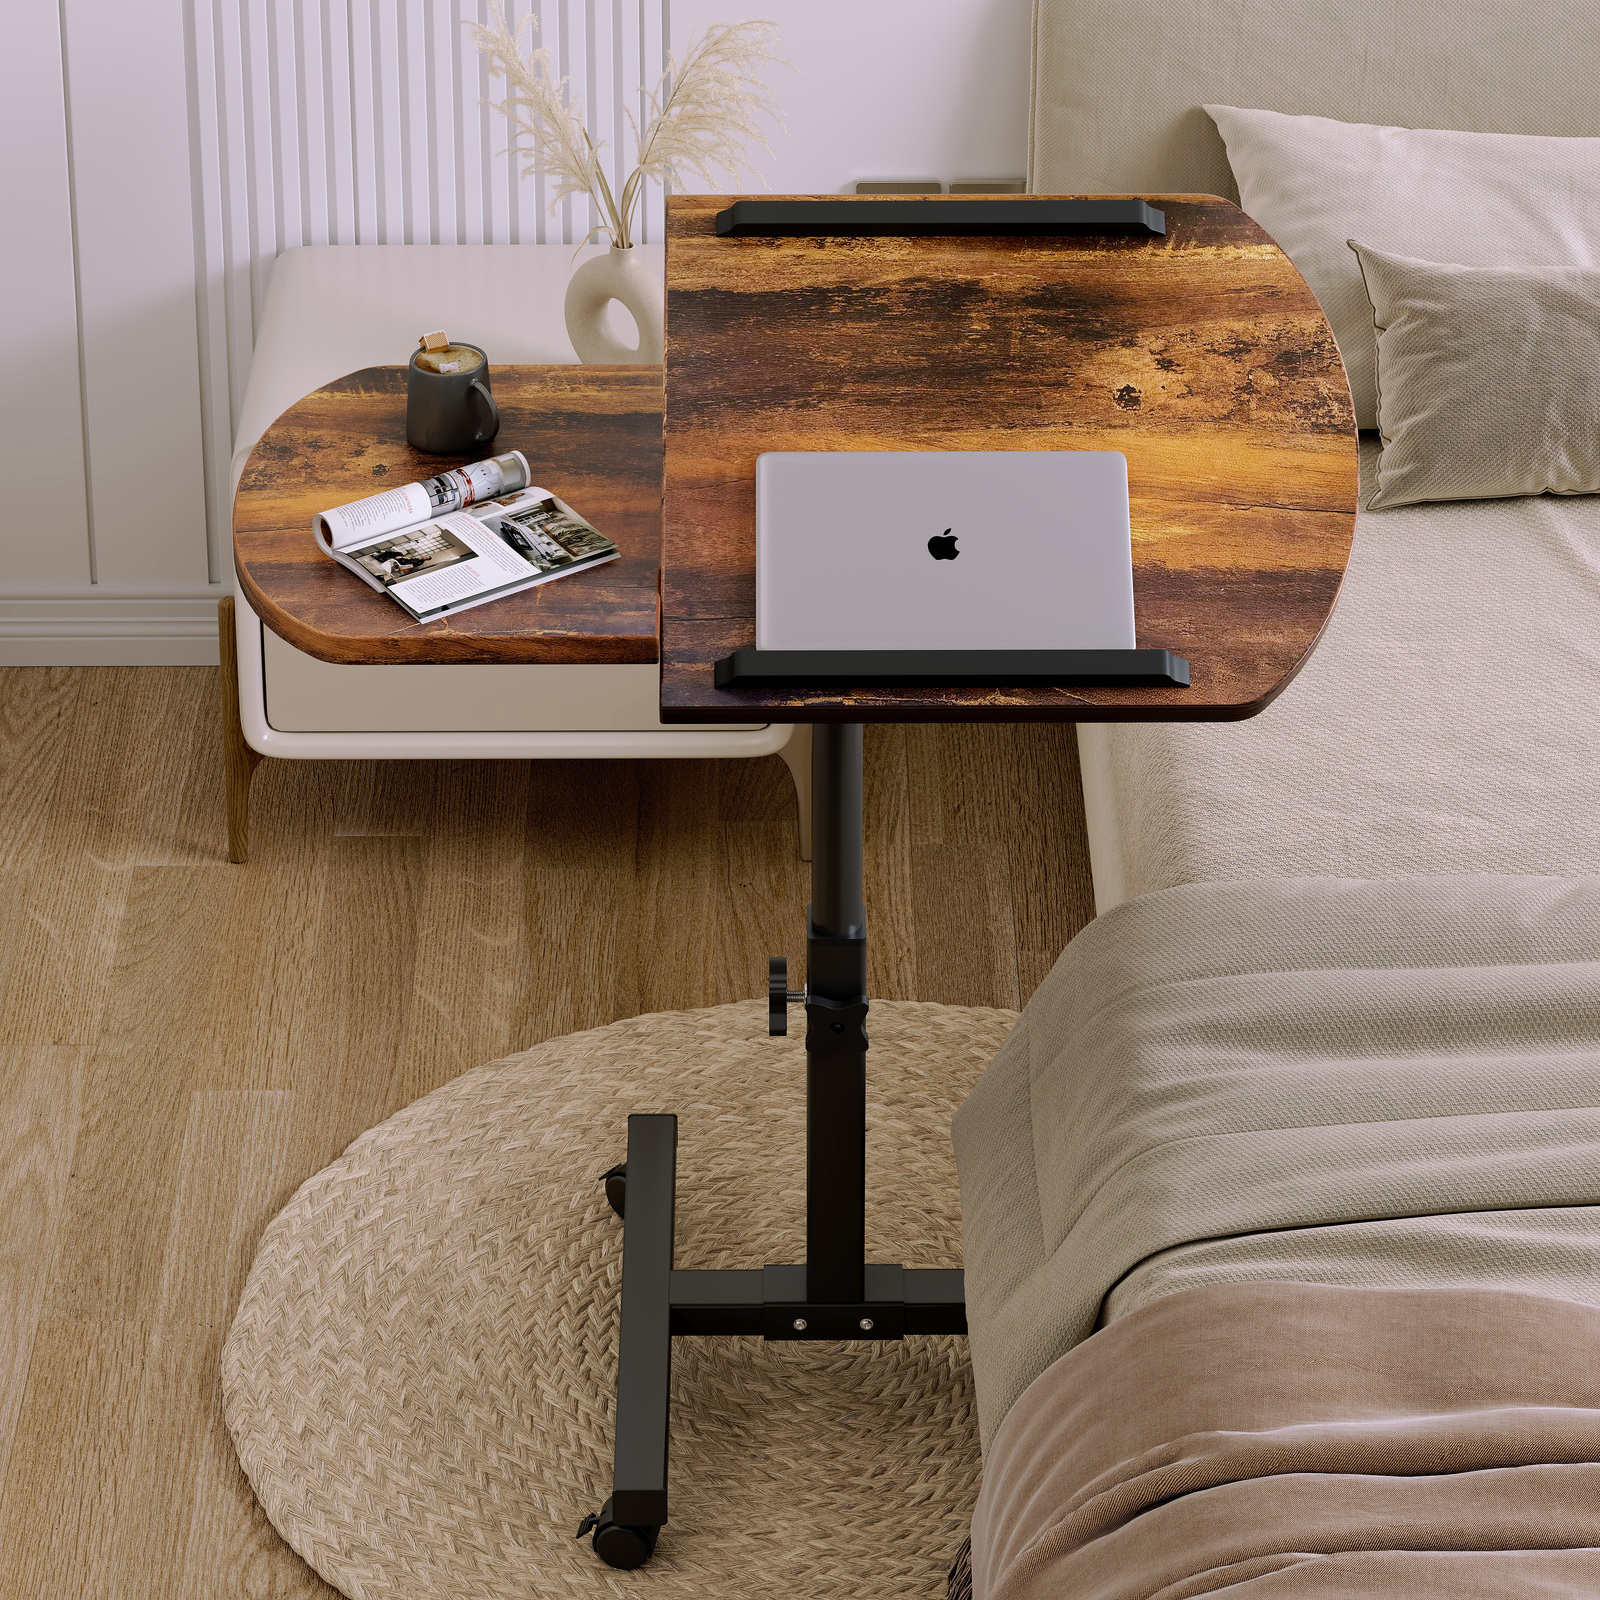 Motif 2-in-1 Adjustable Portable Sofa Bed Side Table Laptop Desk with Wheels (Rustic Wood)